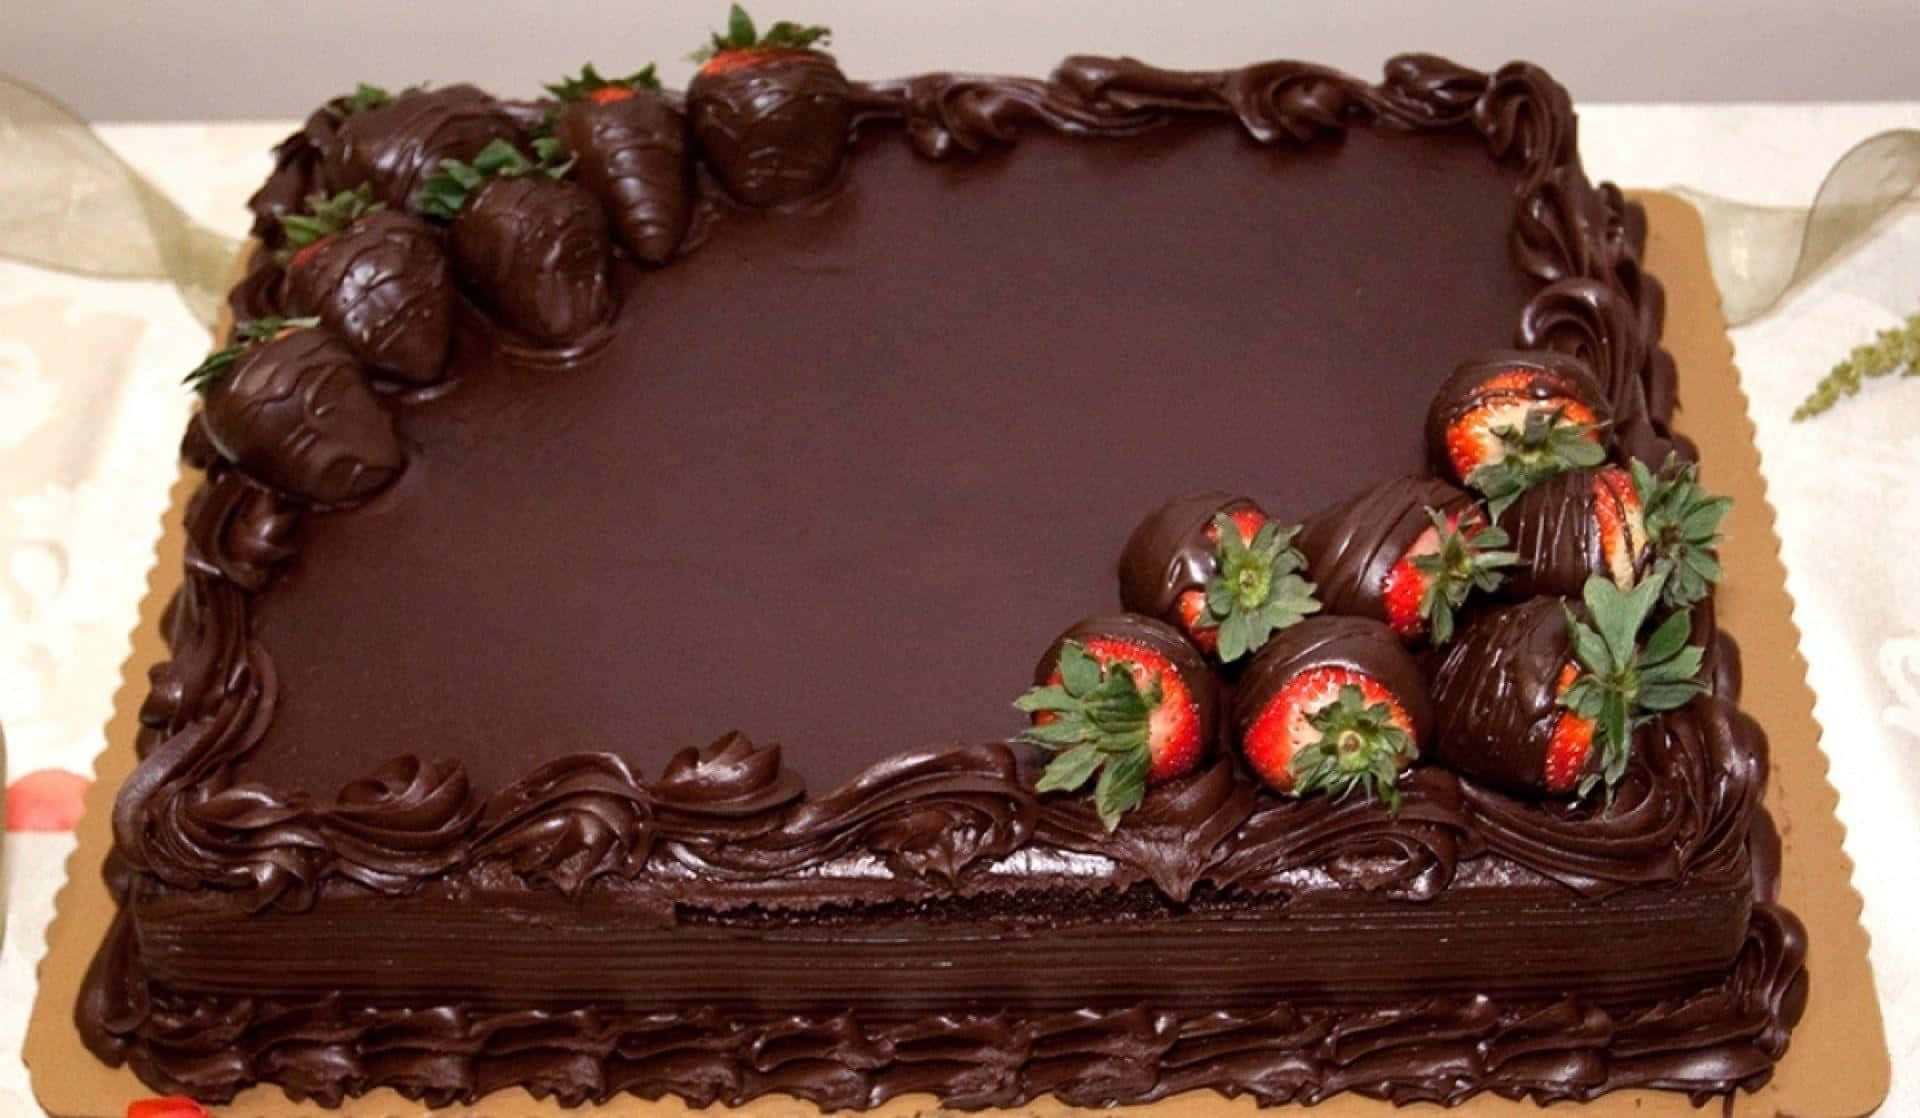 Chocolate Cake With Strawberries And Chocolate Frosting